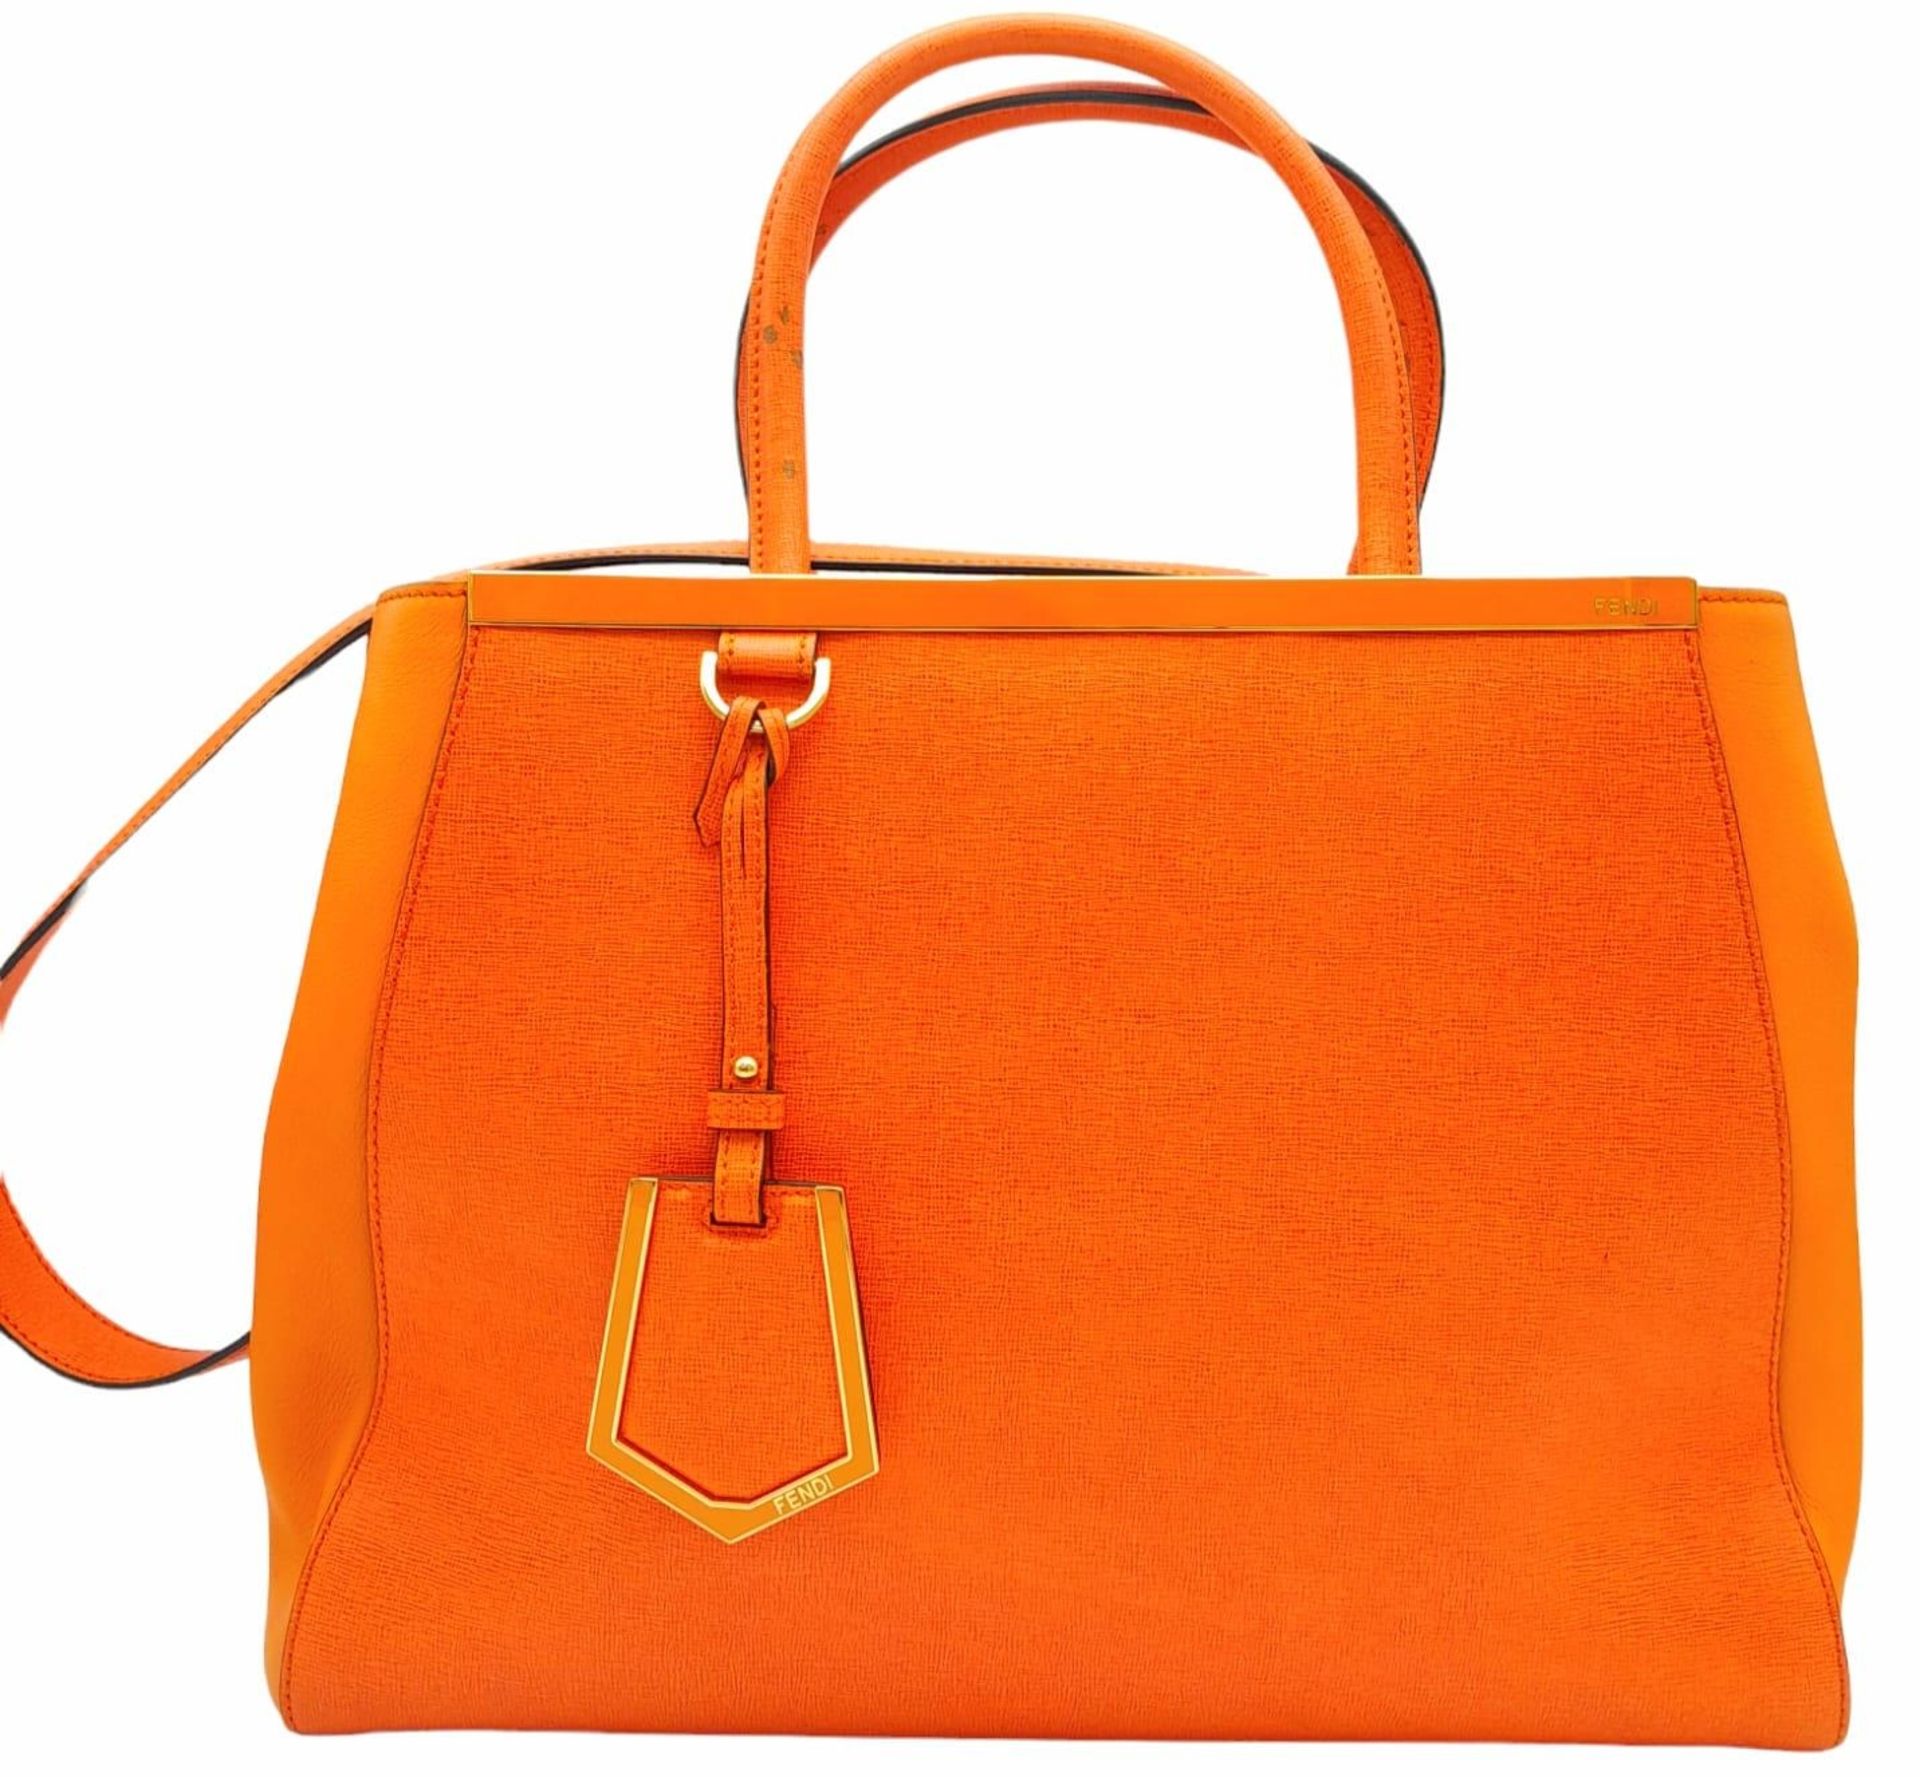 A Fendi Two Tone Orange Leather 2jours Tote Bag. Textured exterior with gold-tone hardware. Hand and